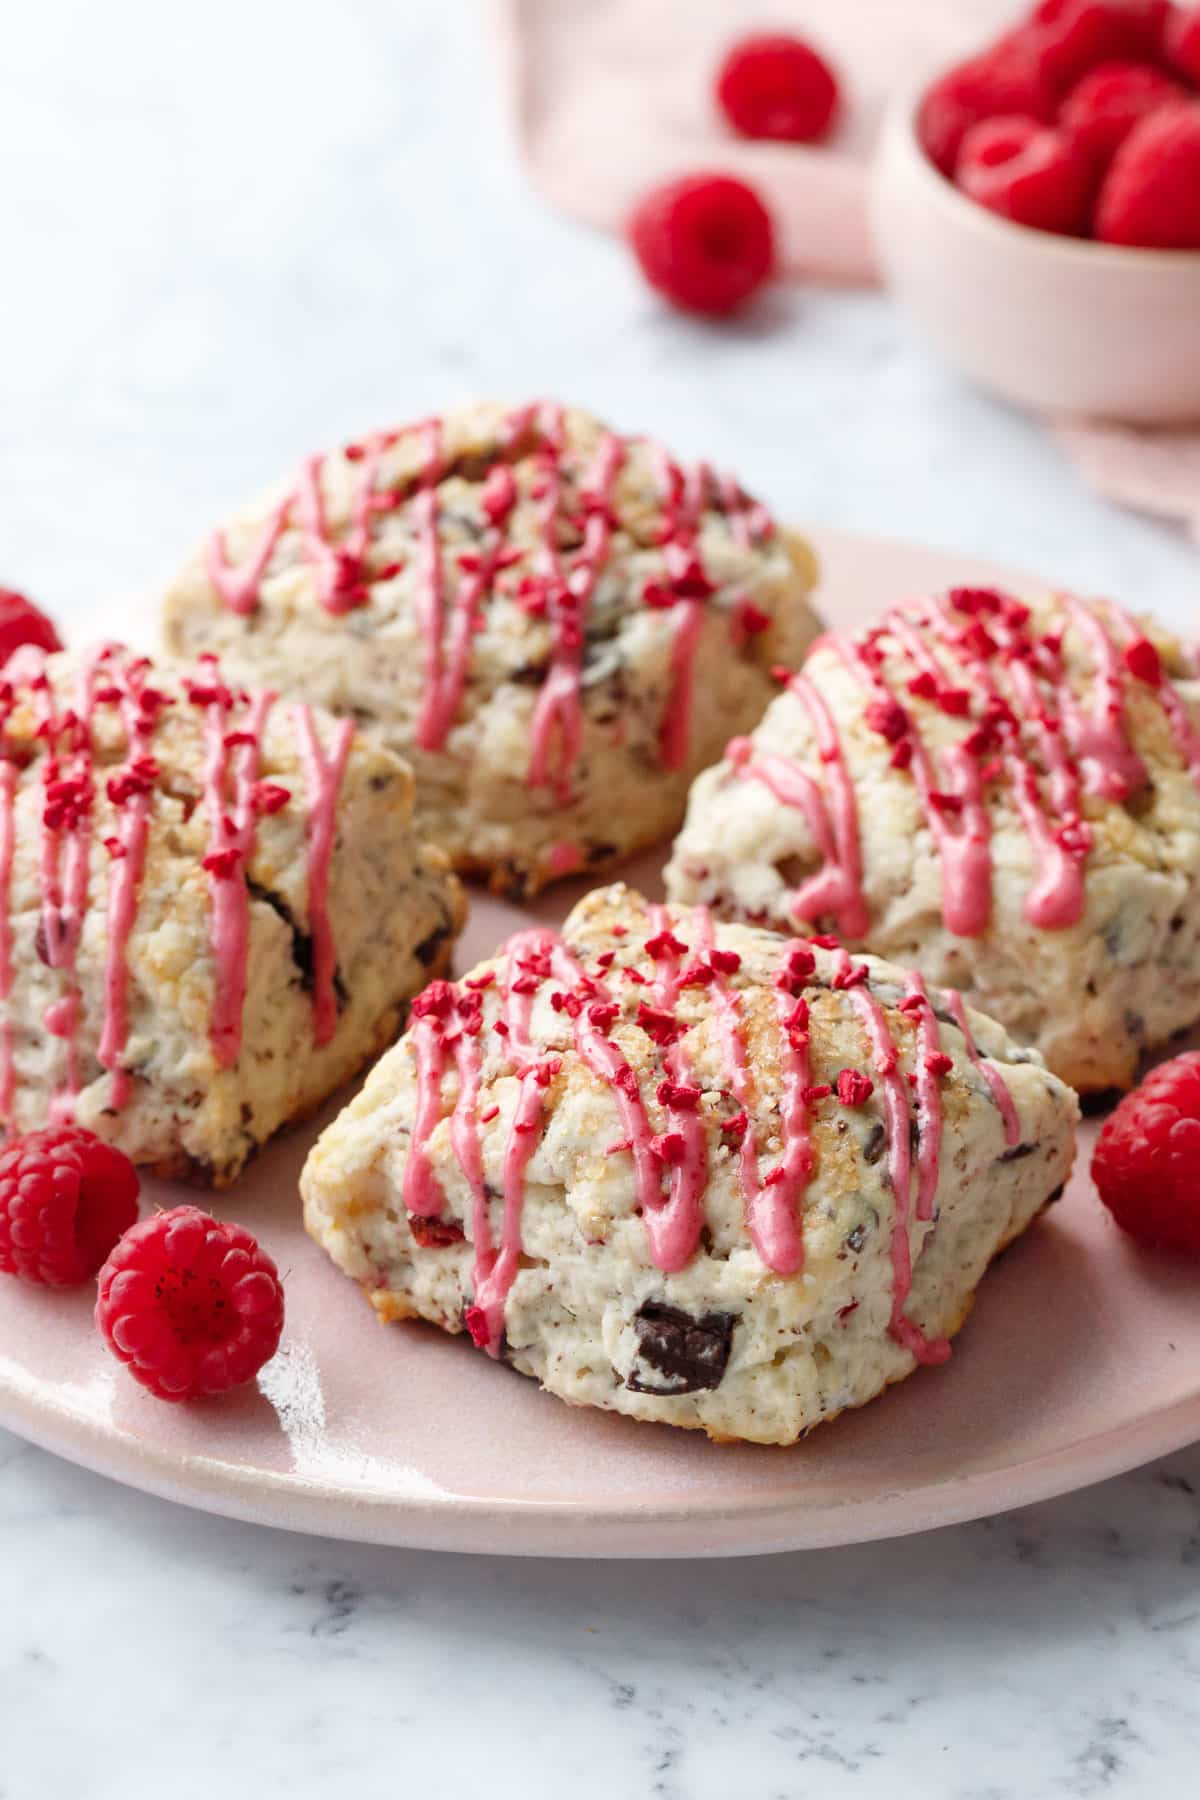 Four Dark Chocolate Raspberry Cream Scones on a pink serving plate, drizzled with pink raspberry glaze and a few fresh raspberries on the side.